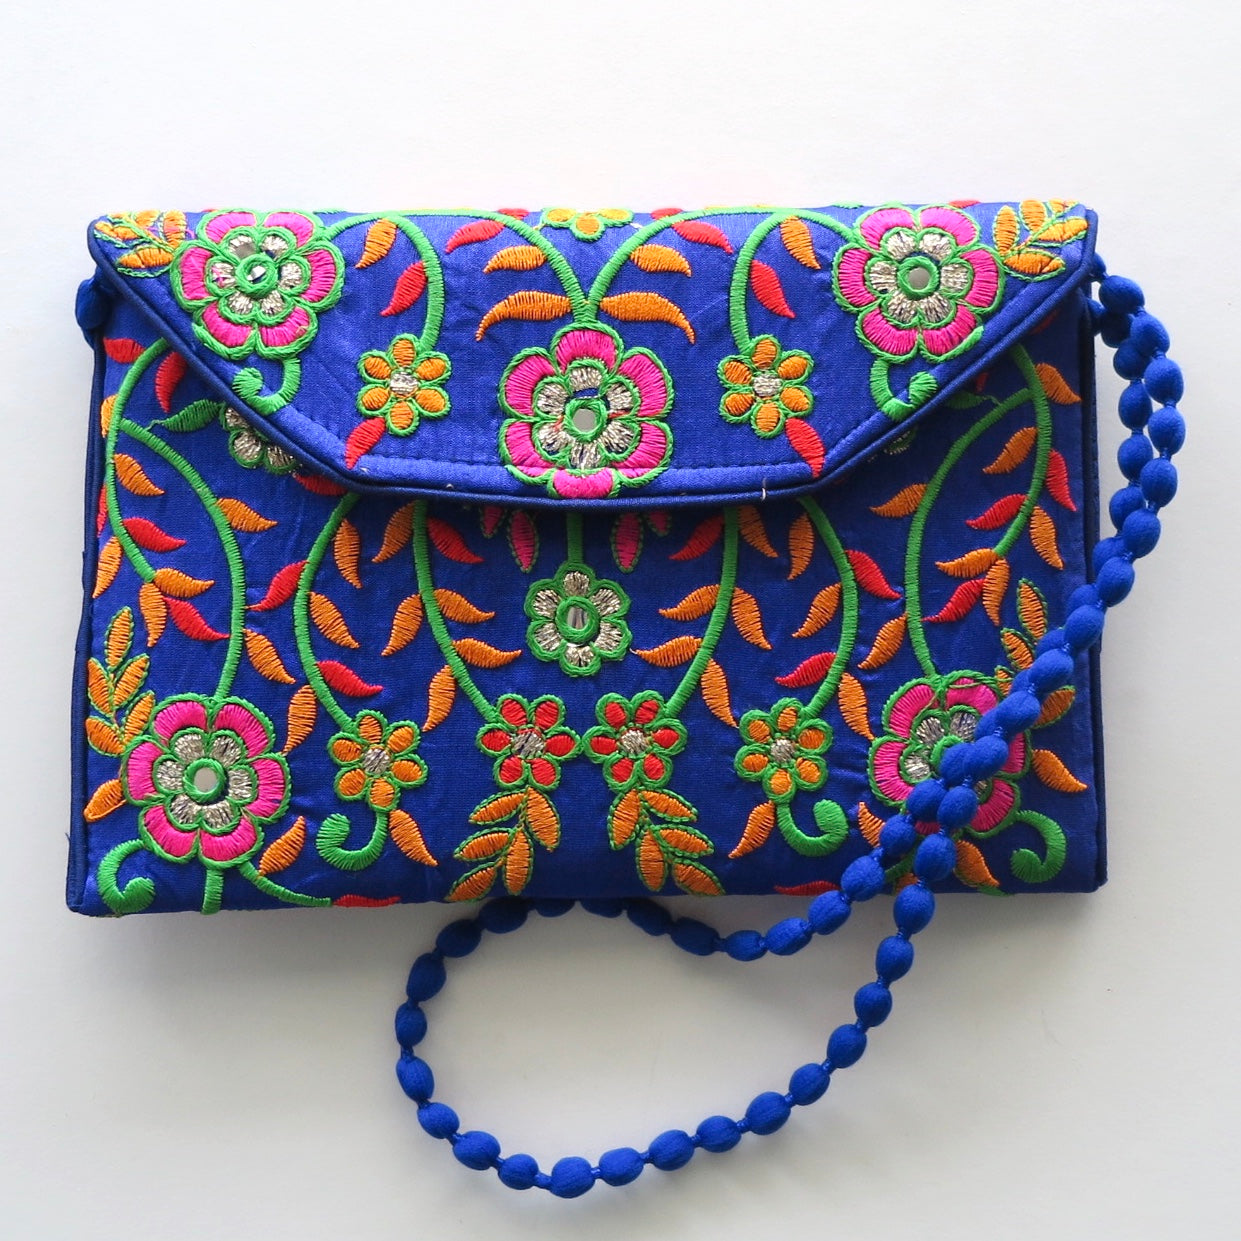 Shop Handcrafted Embroidery Rose Handbags For Women Online